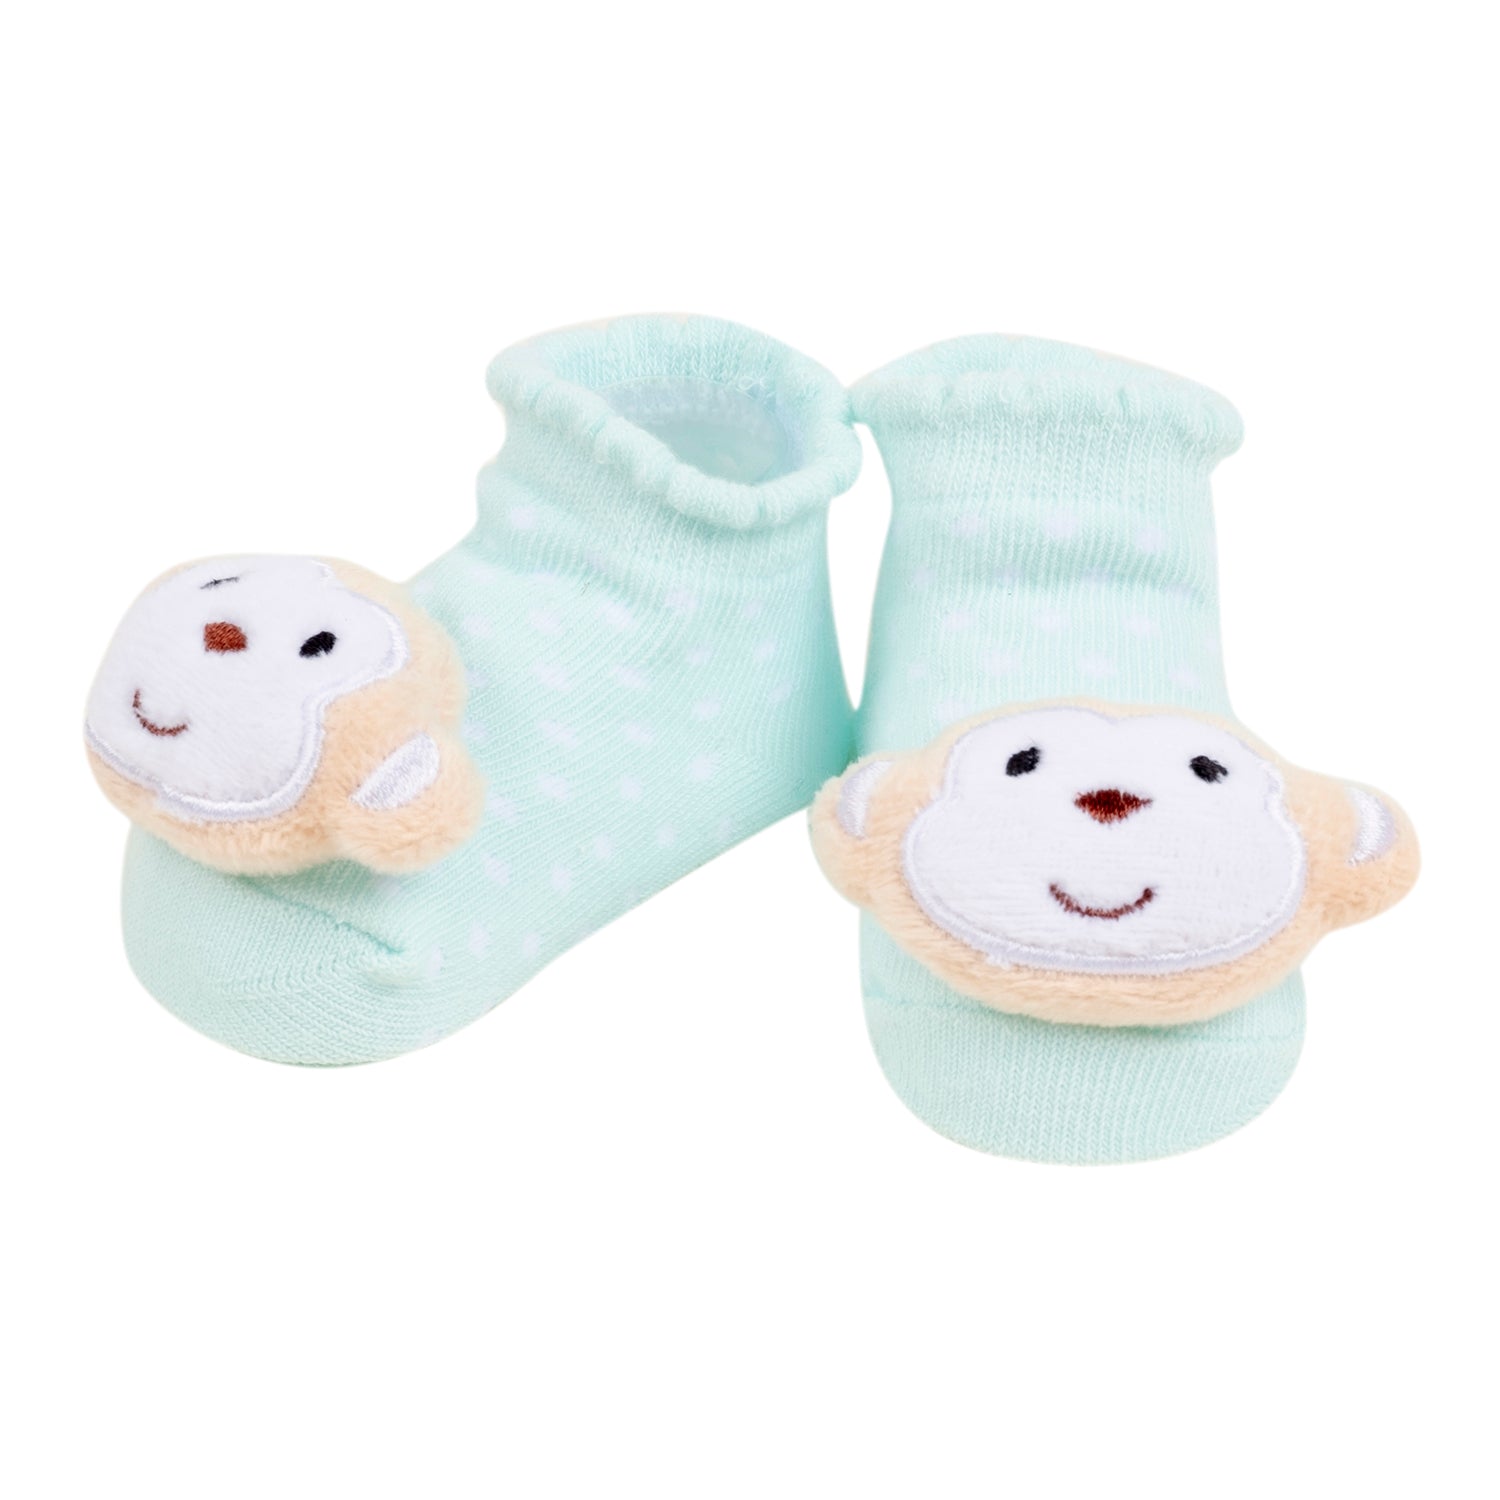 Baby Moo 3D Elephant Monkey Cotton Ankle Length Fancy Infant Gift Set of 2 Socks Booties - Turquoise, Pink